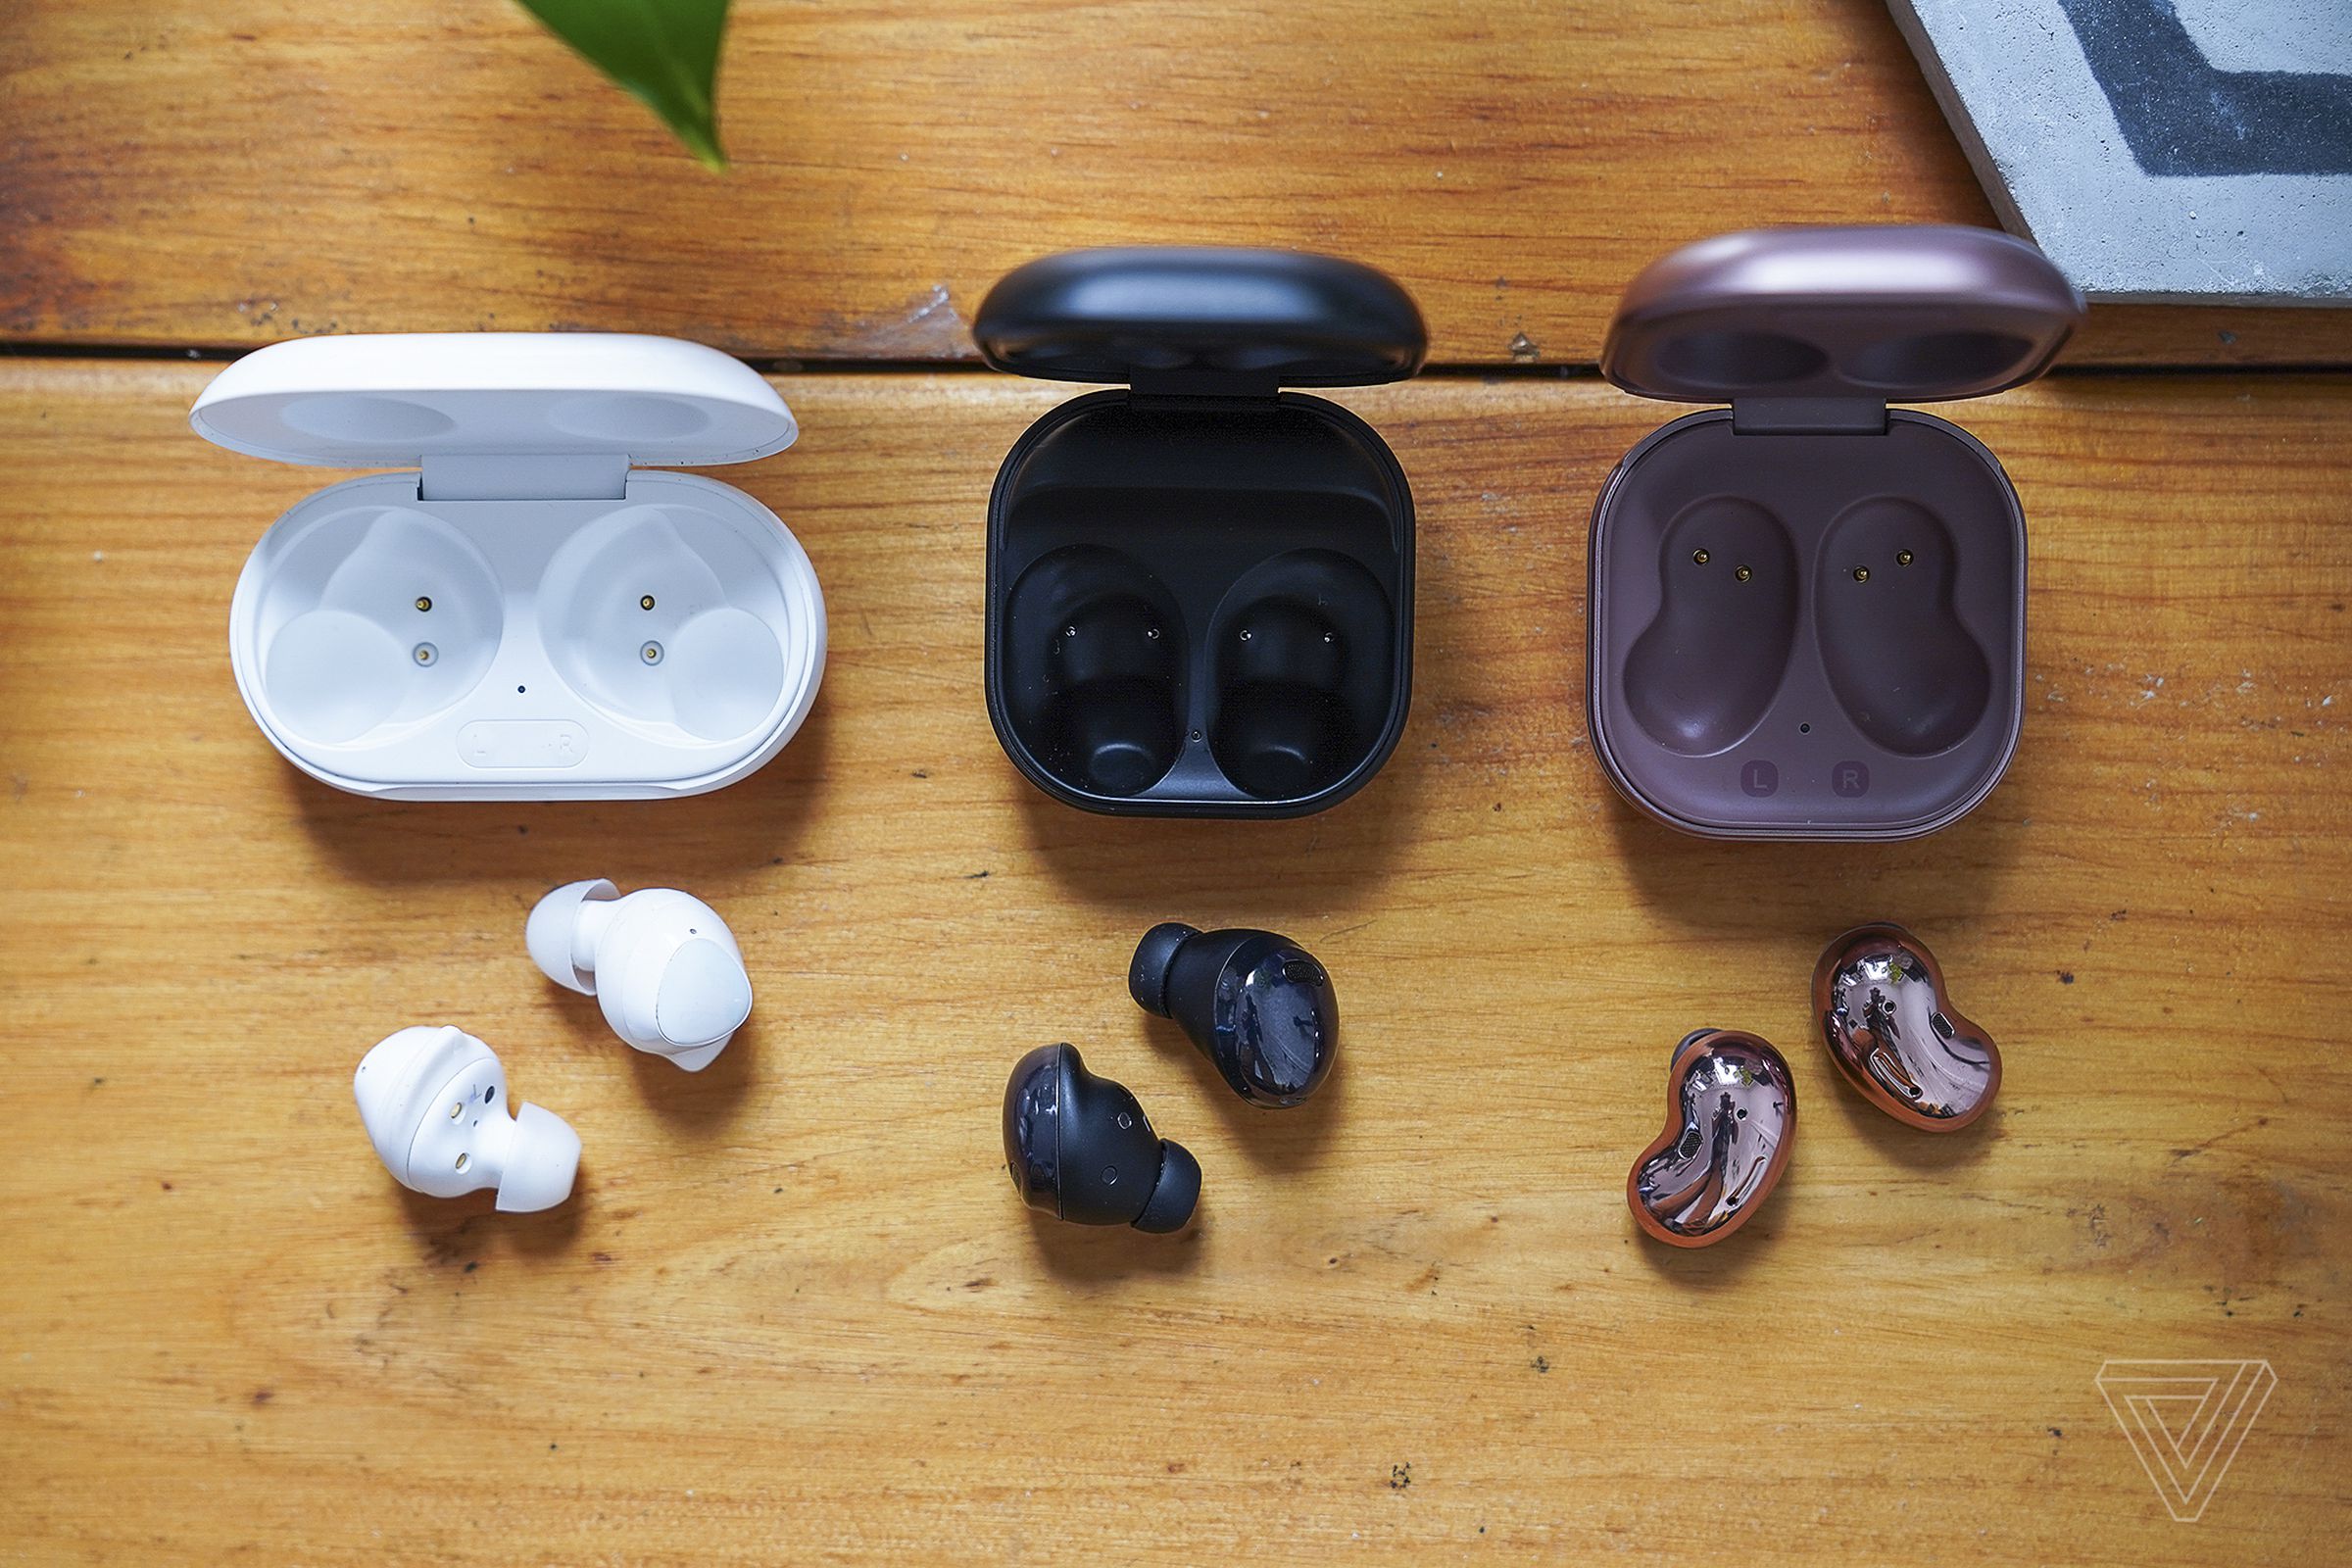 The Galaxy Buds Pro blend design aspects of the Galaxy Buds Plus and Galaxy Buds Live.